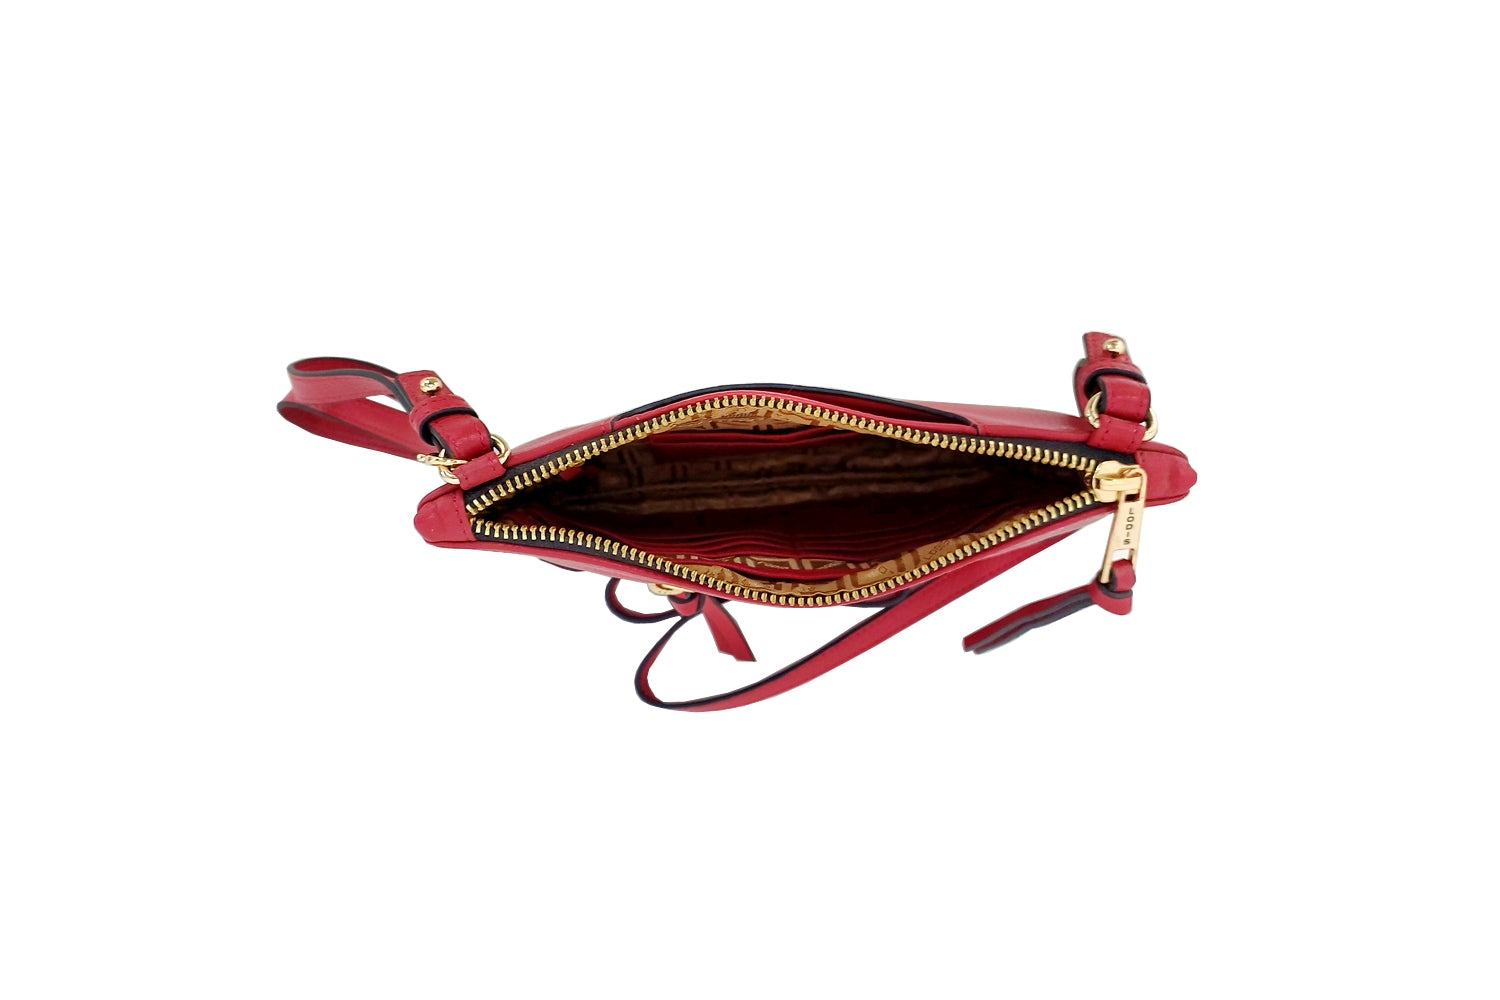 Get  Exclusive ELLIE SLING With 100% Genuine Leather At Lodis